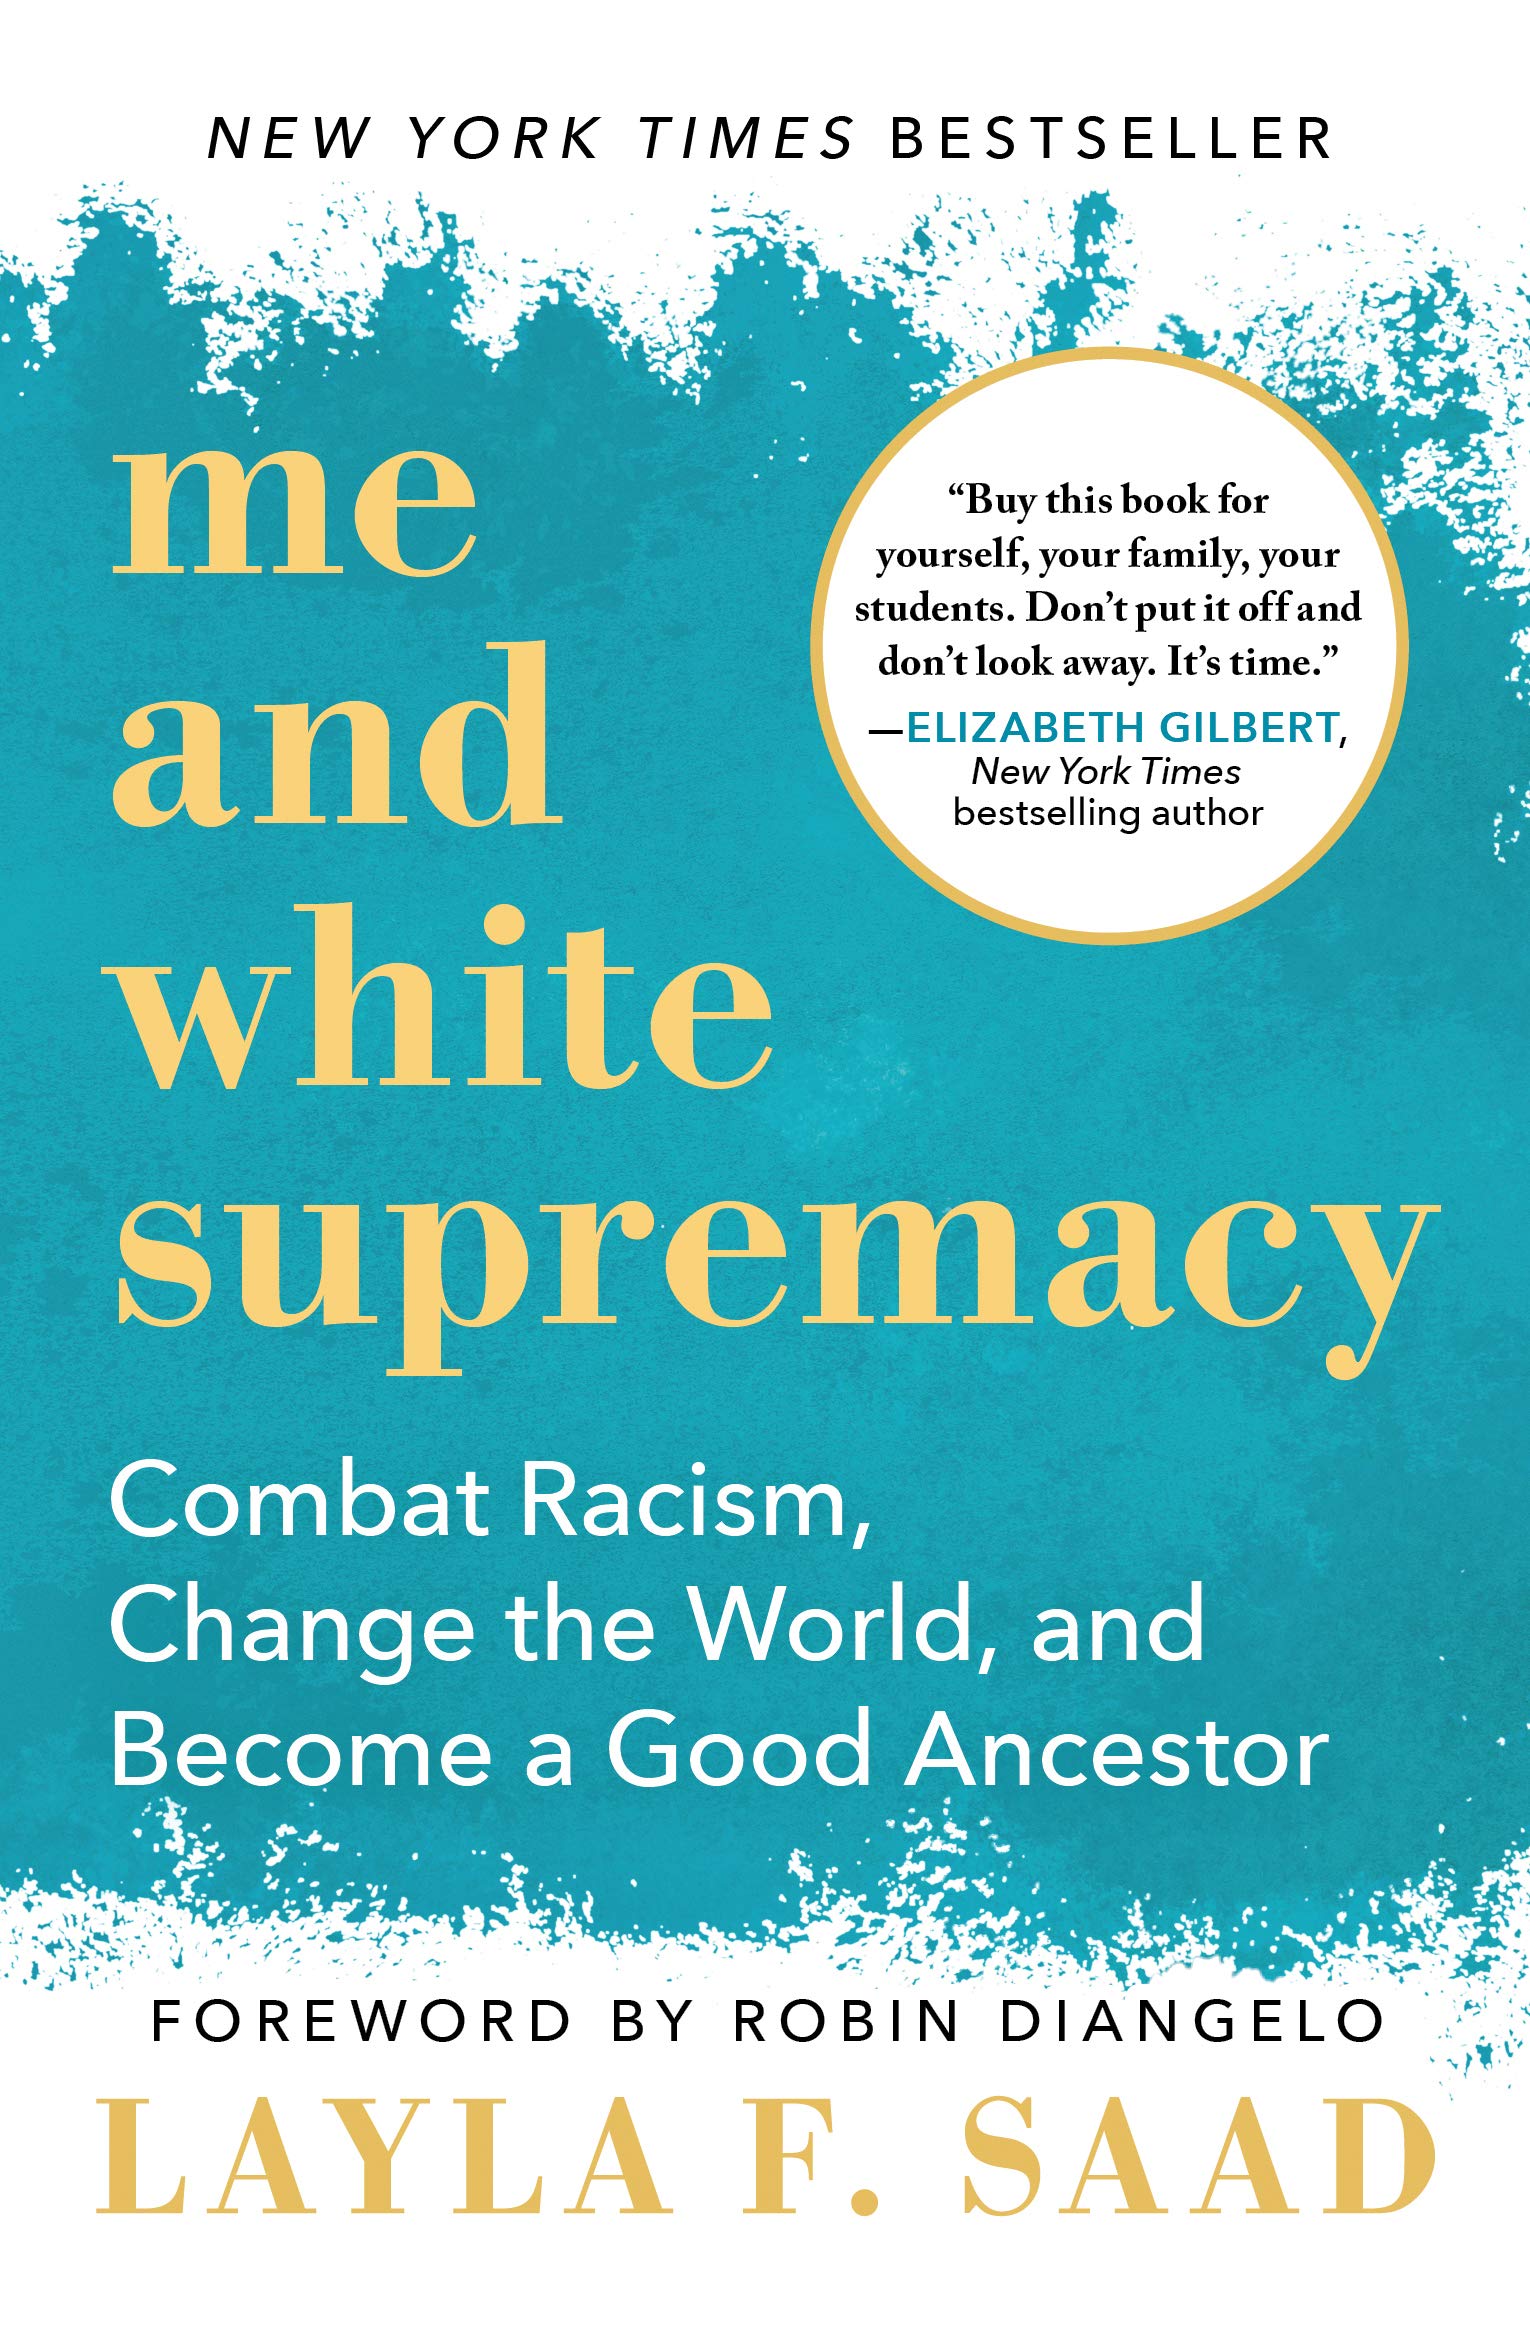 'Me and White Supremacy' by Layla Saad